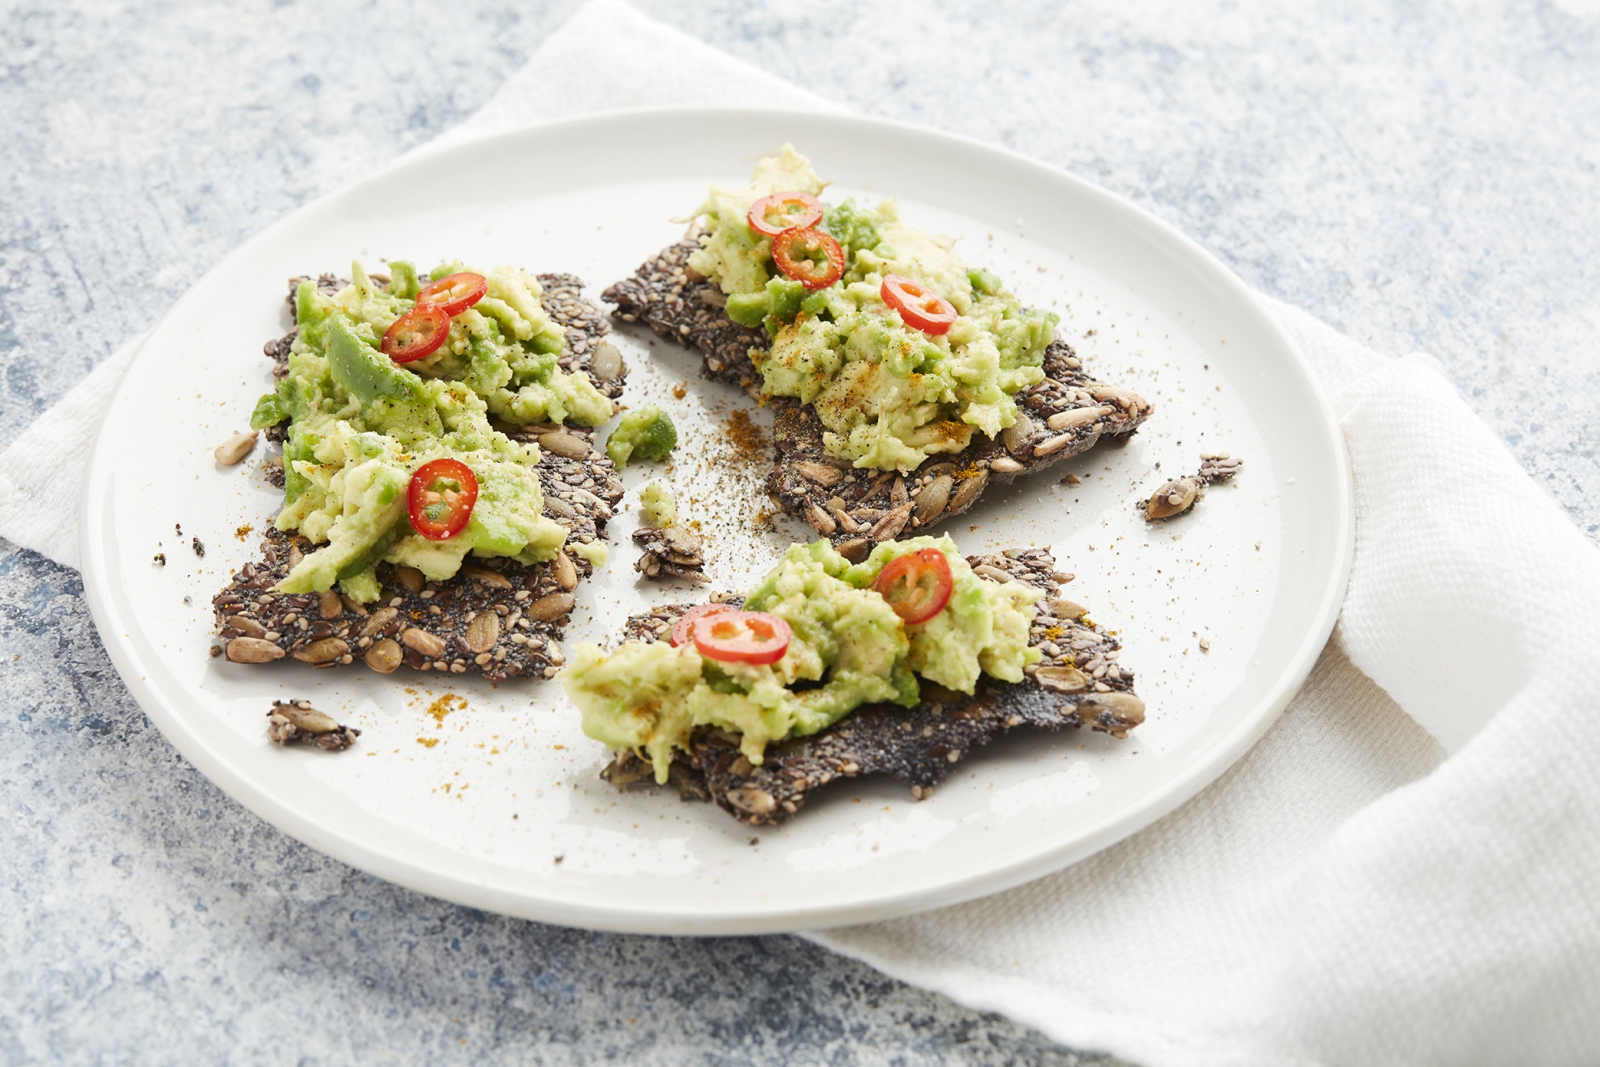 3 Variations of Avocado Toast with Gluten Free Seed Crackers (from my cookbook Keto in 15 Minuten)